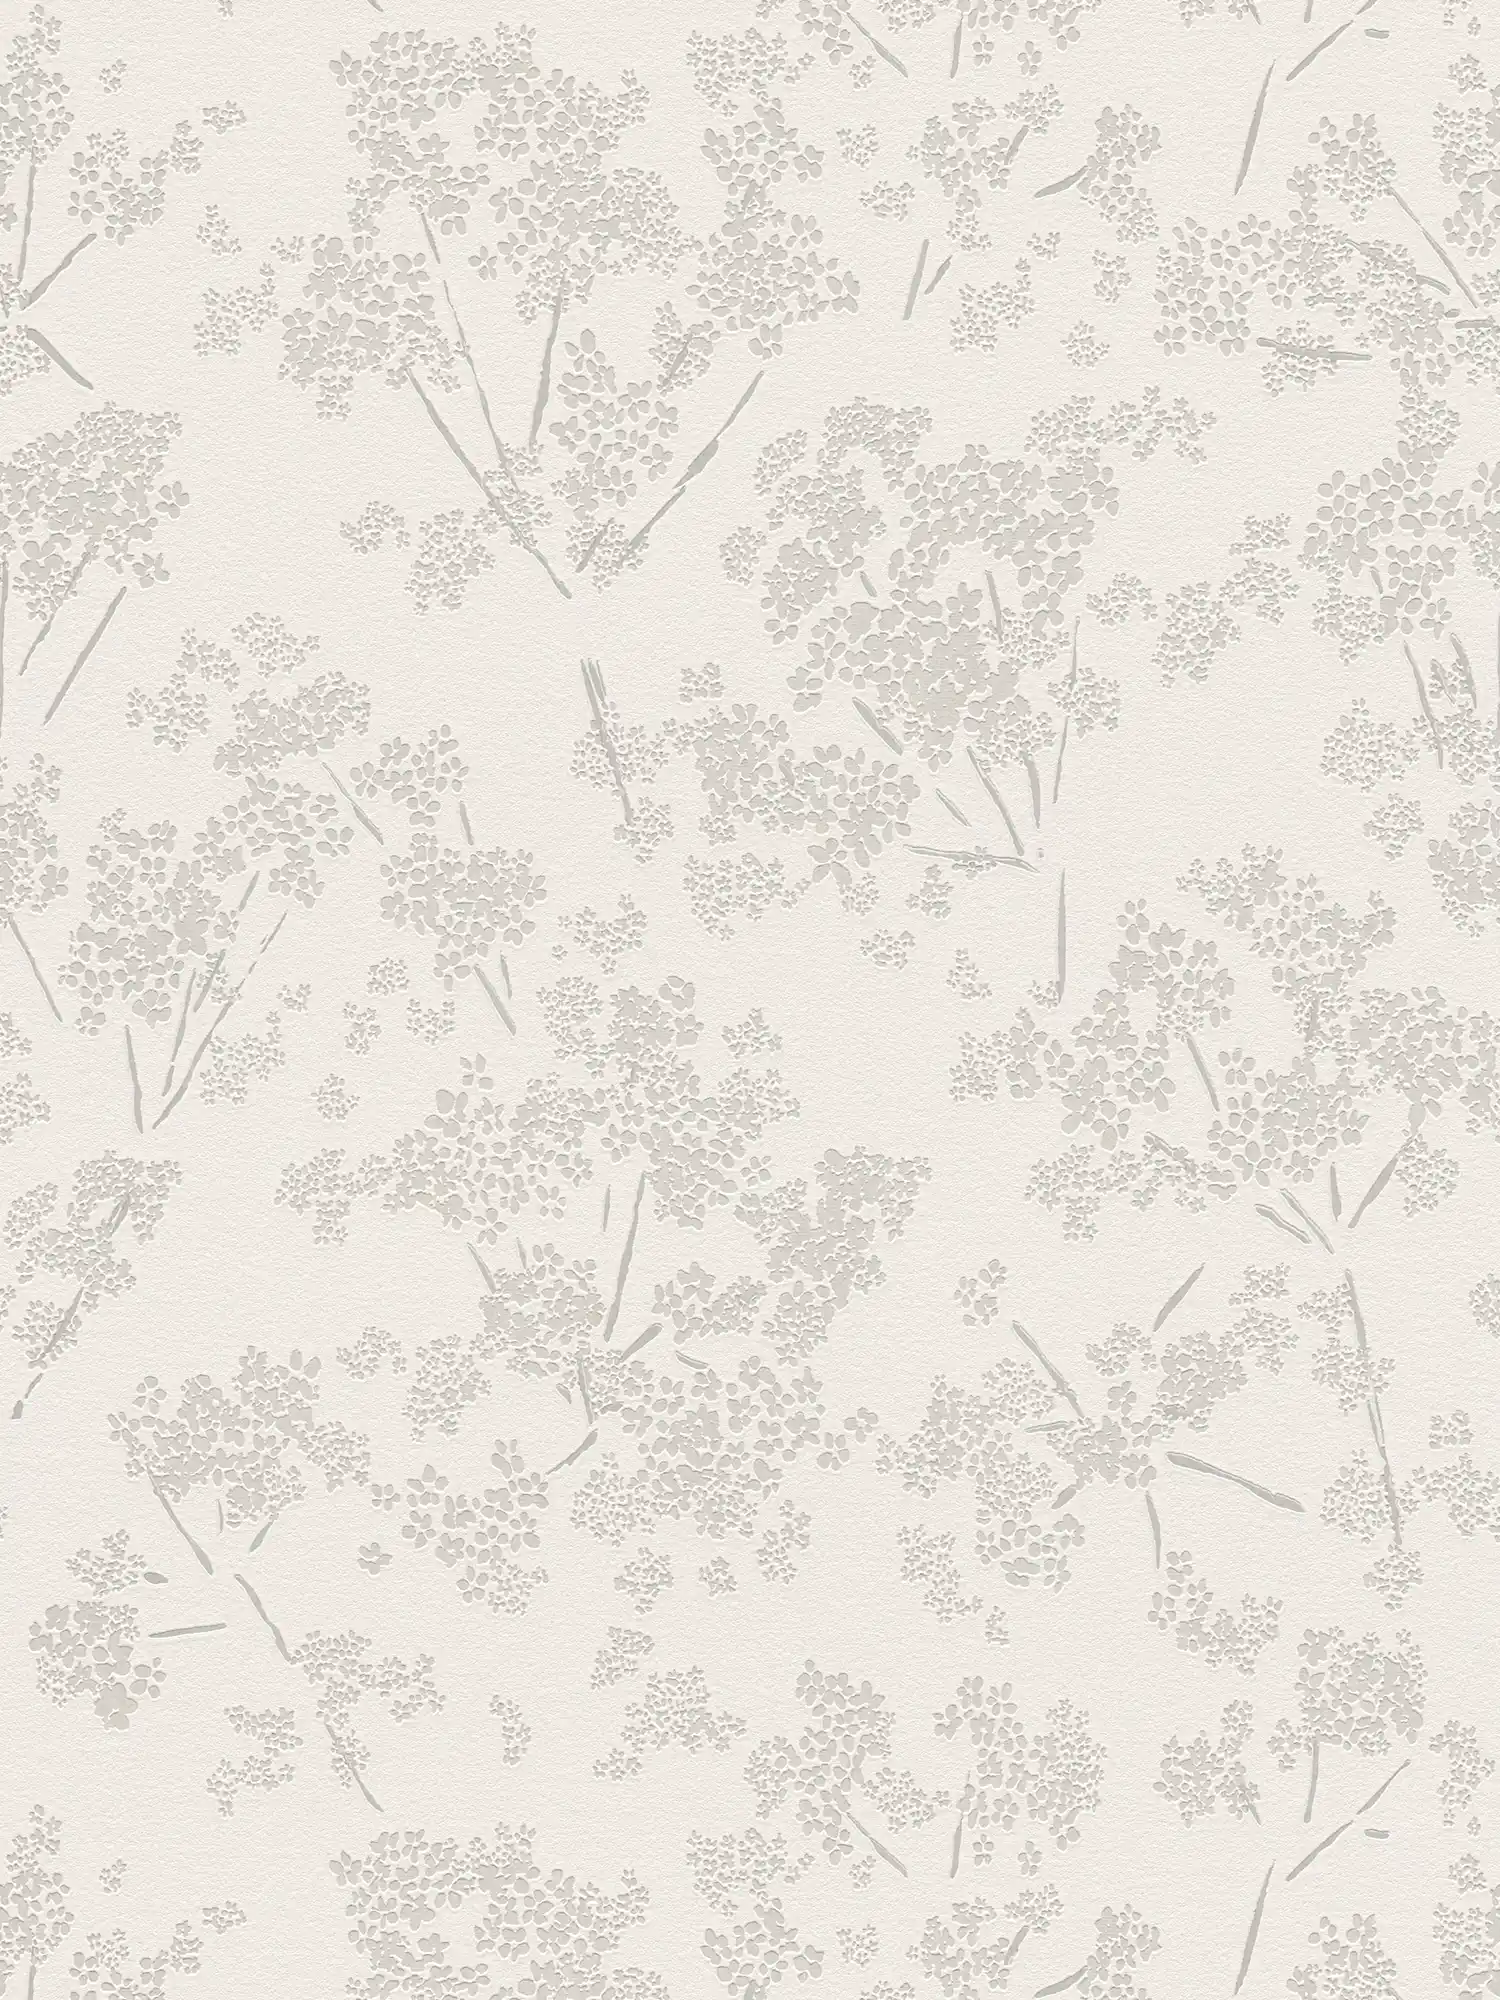 Non-woven wallpaper with floral pattern - white, grey
